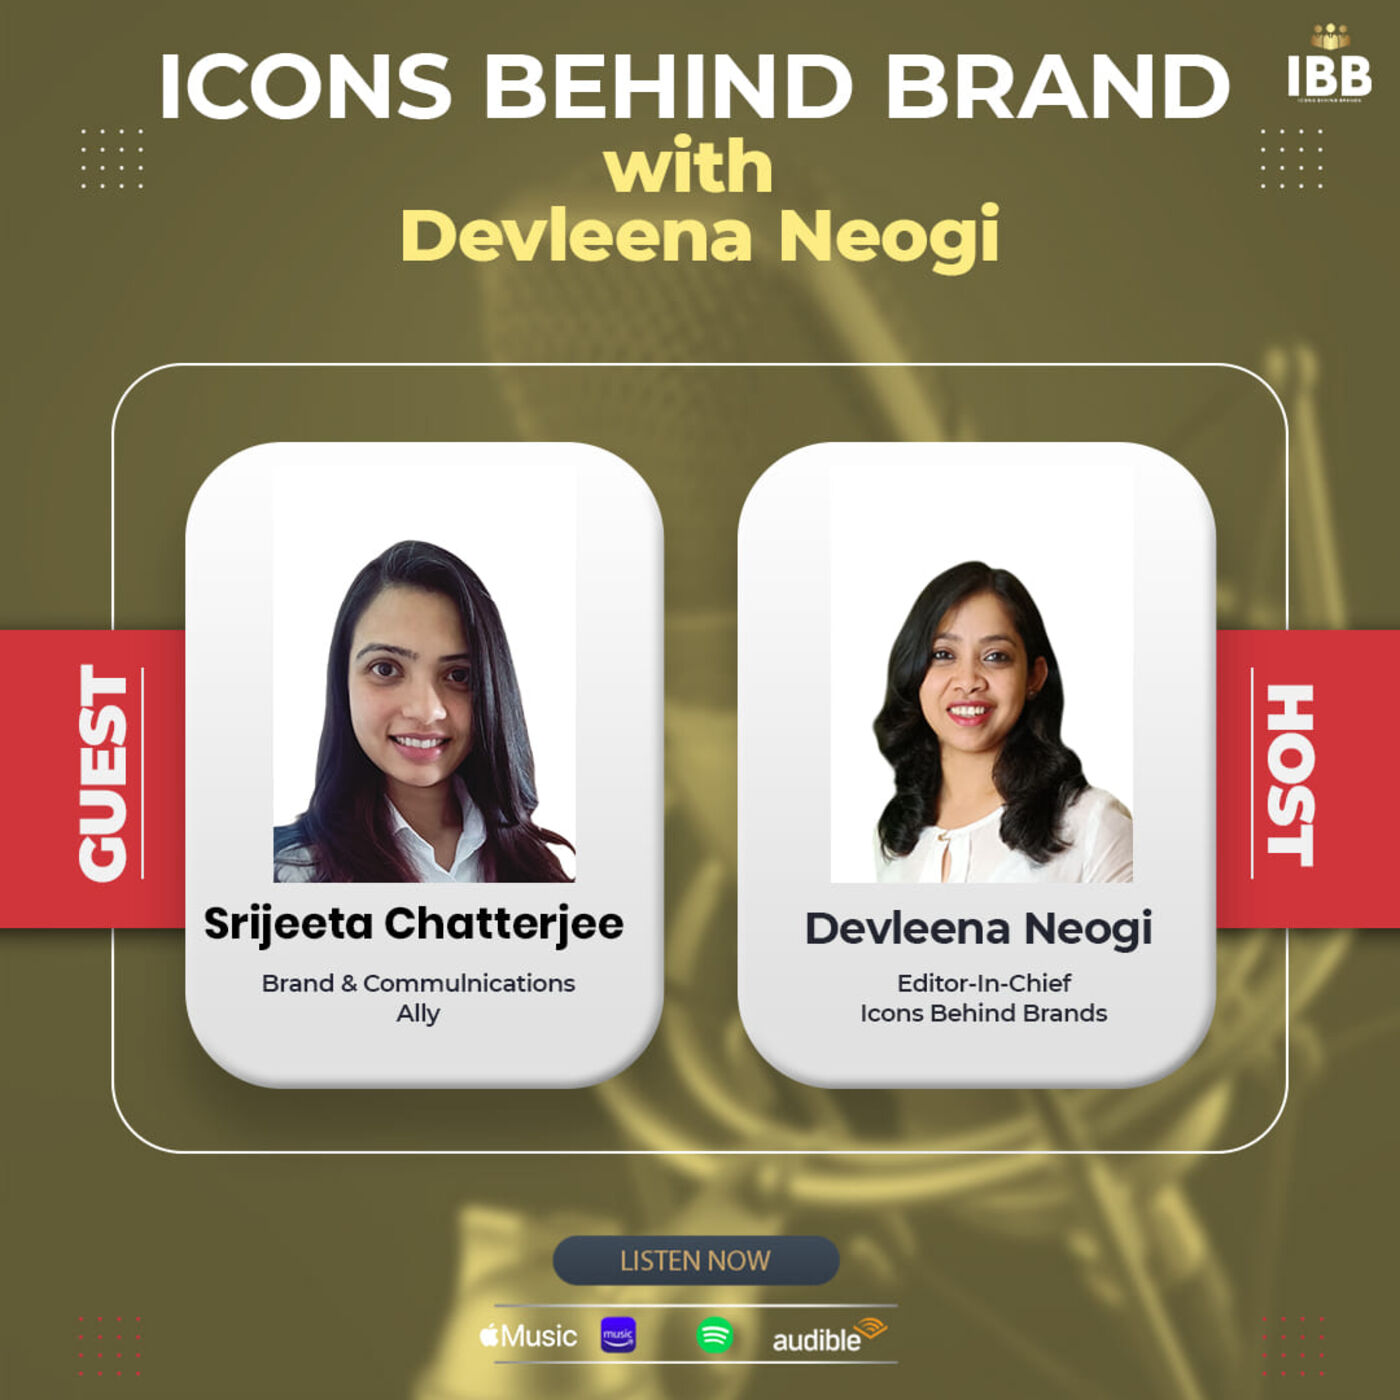 Interview on the expanding the horizon about key marketing and more, with Ms. Srijeeta Chatterjee Brand and Communications Lead, Shell India| IBB